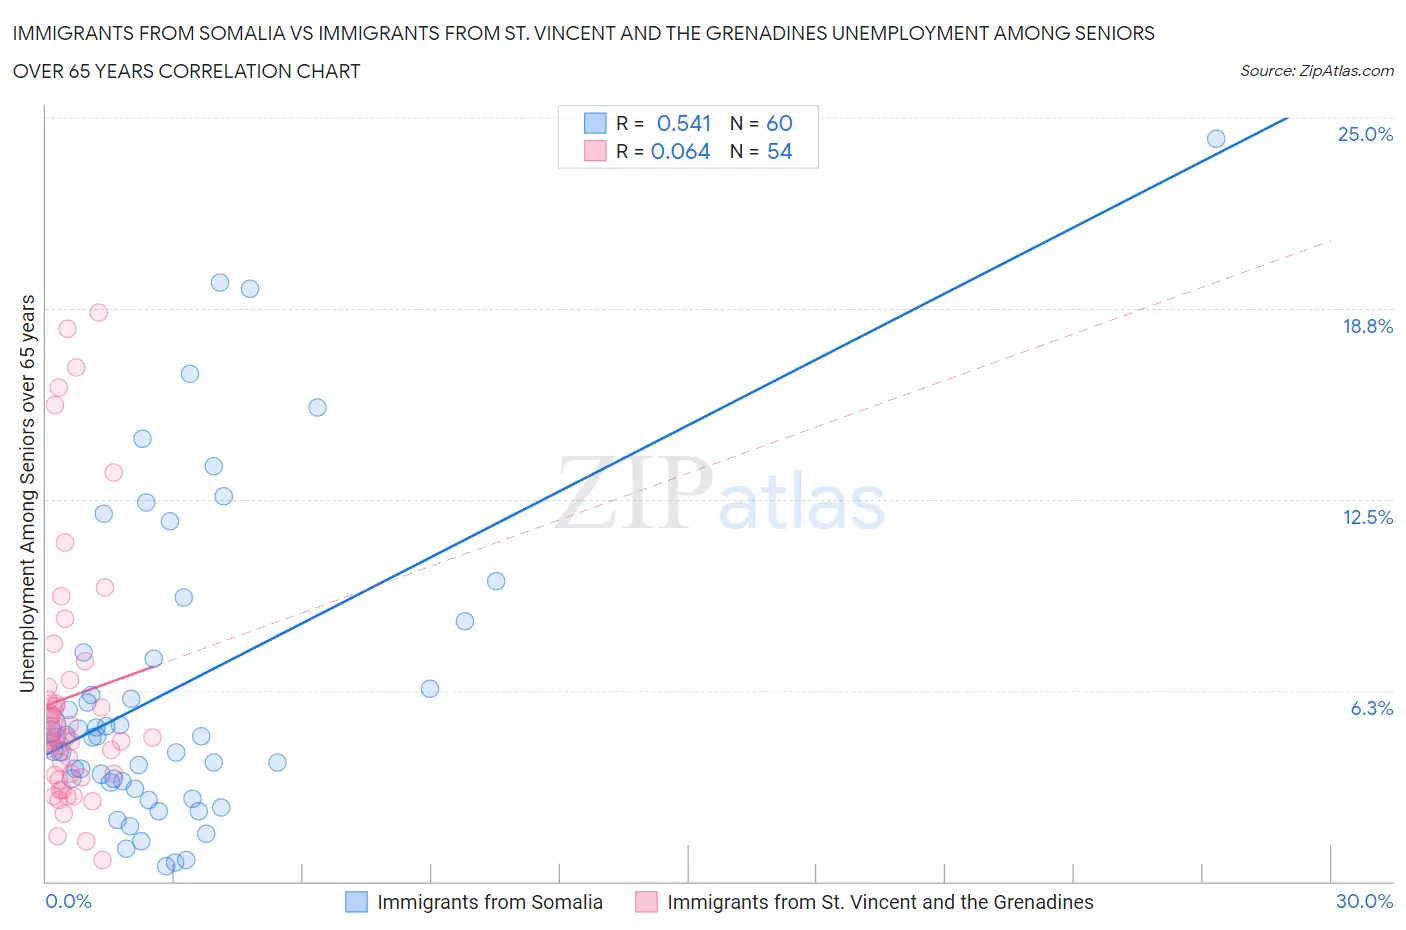 Immigrants from Somalia vs Immigrants from St. Vincent and the Grenadines Unemployment Among Seniors over 65 years